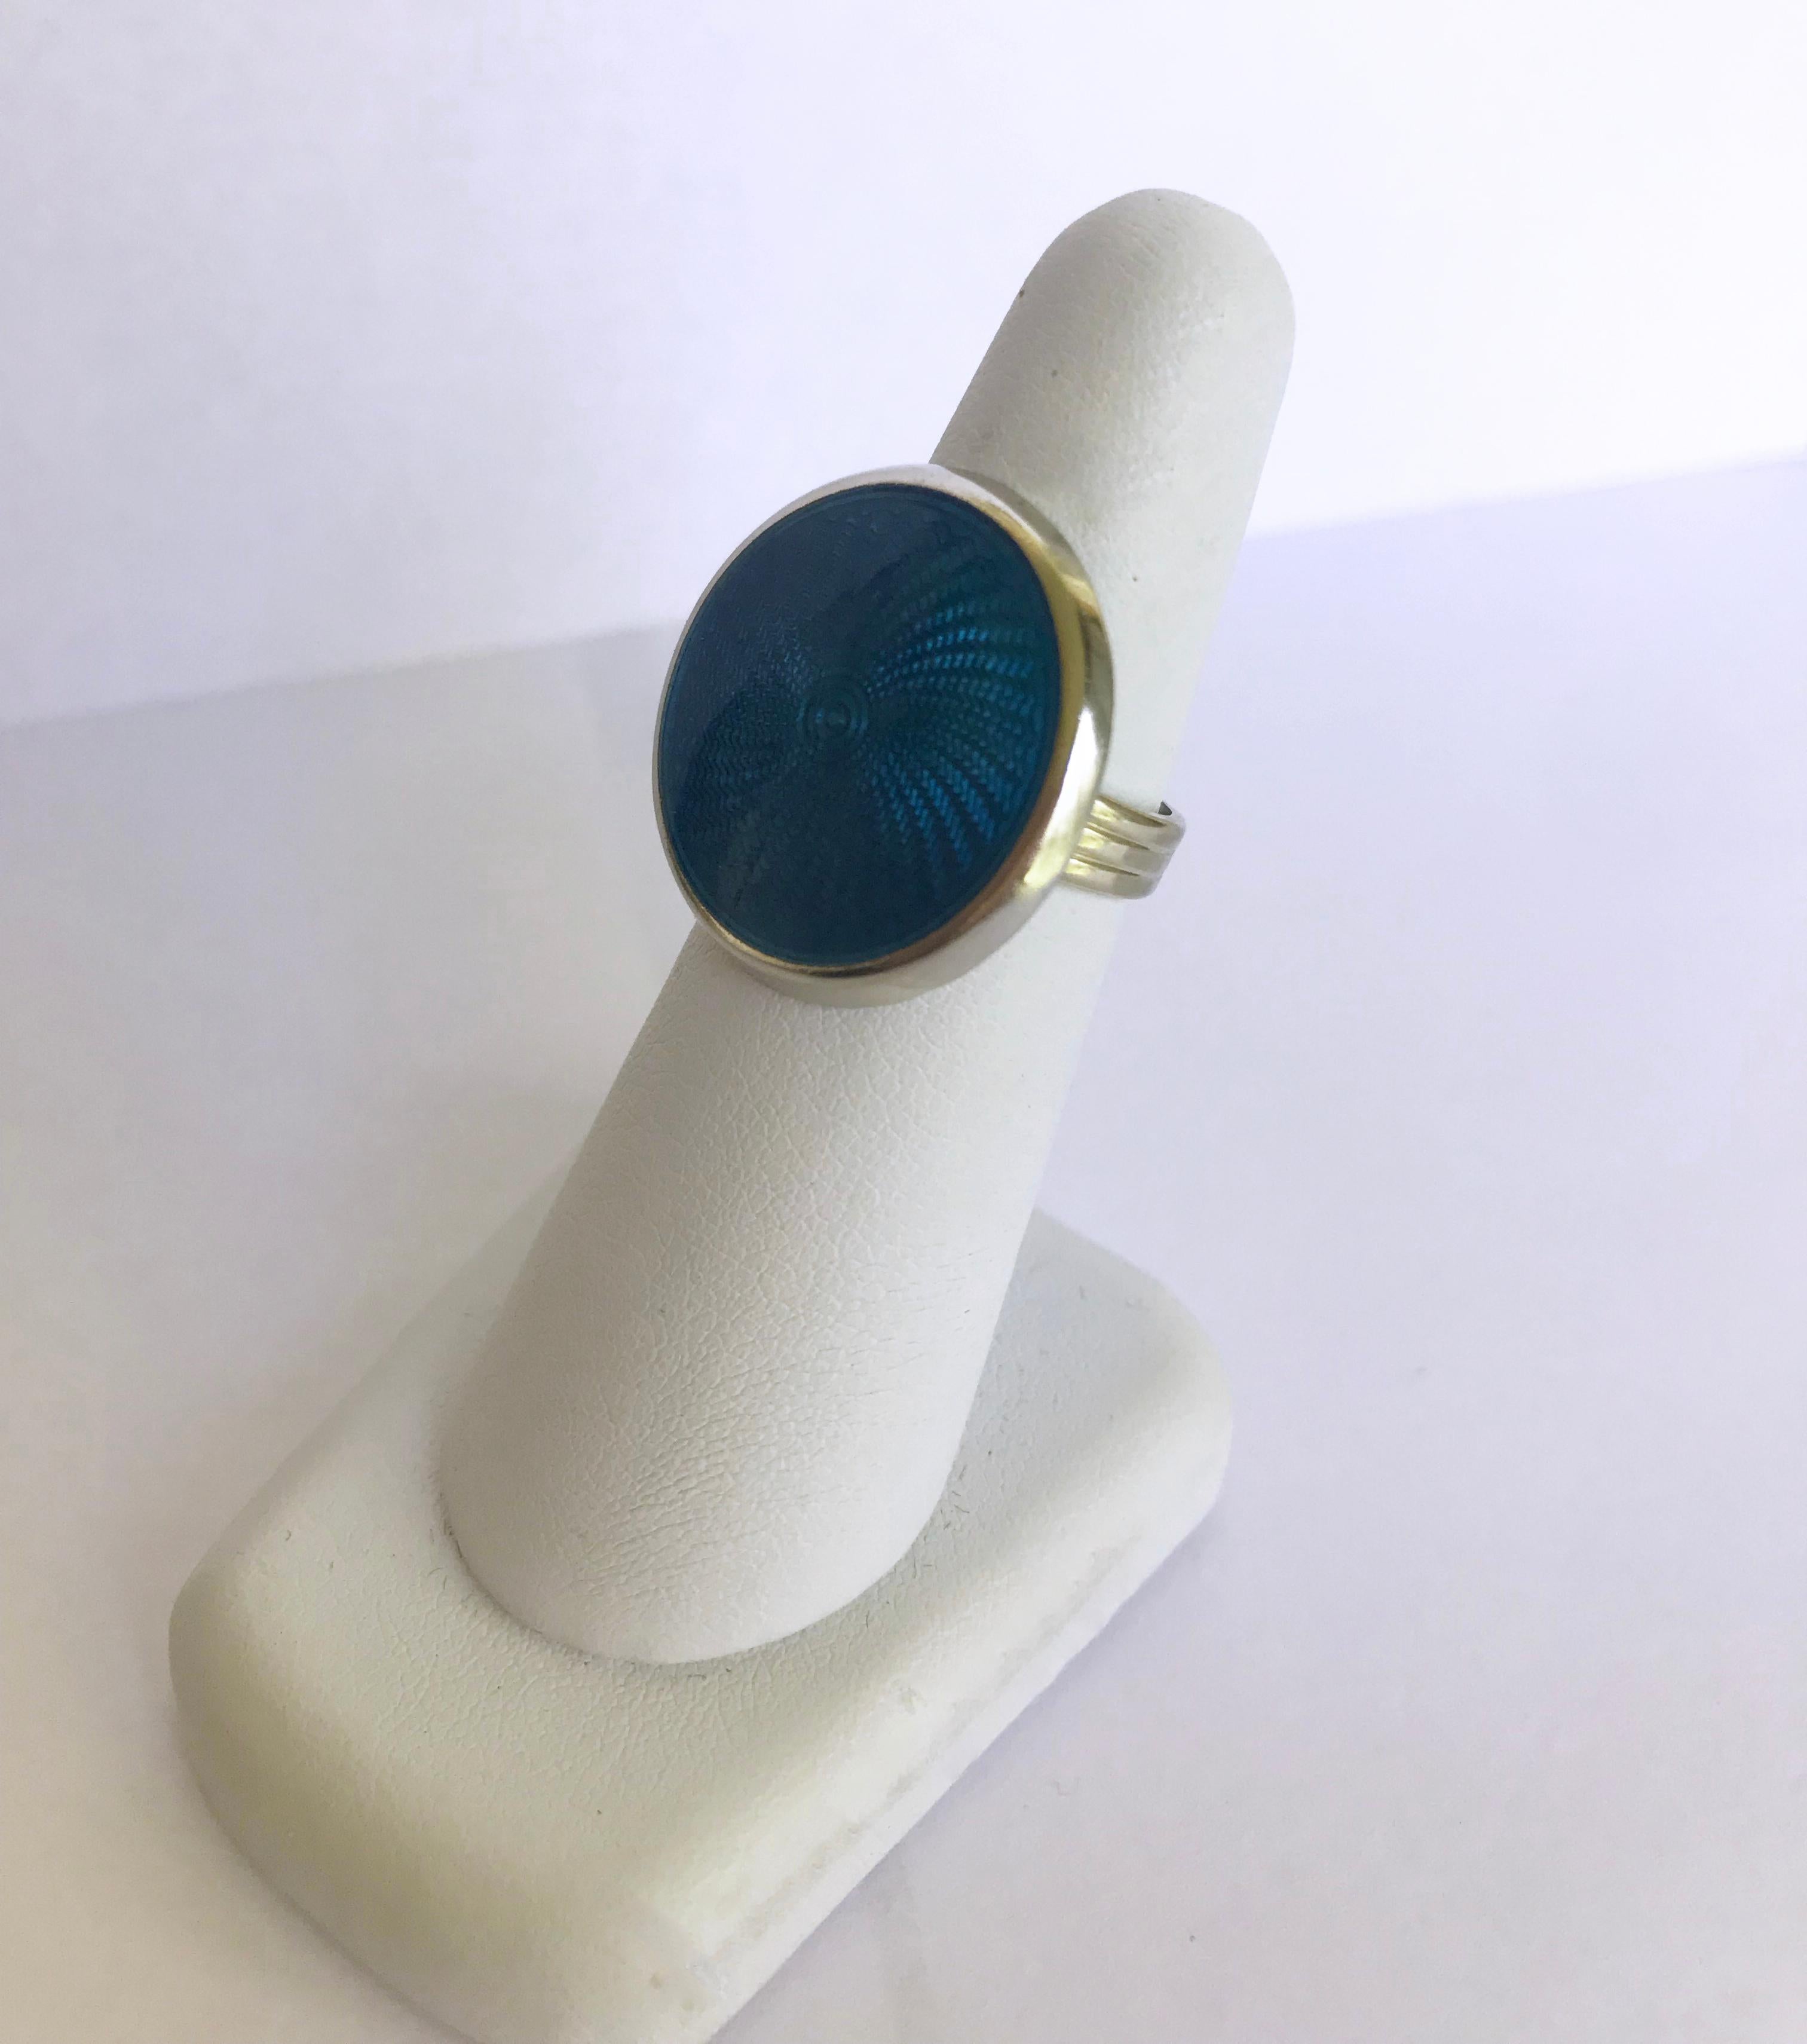 Marina J. created this stunning piece with a vibrant turquoise color enameled circle on the front, glimmering sterling silver around it, and 14 karats white gold for the ring band. The enamel is approximately 20mm by 20mm and the width of the ring